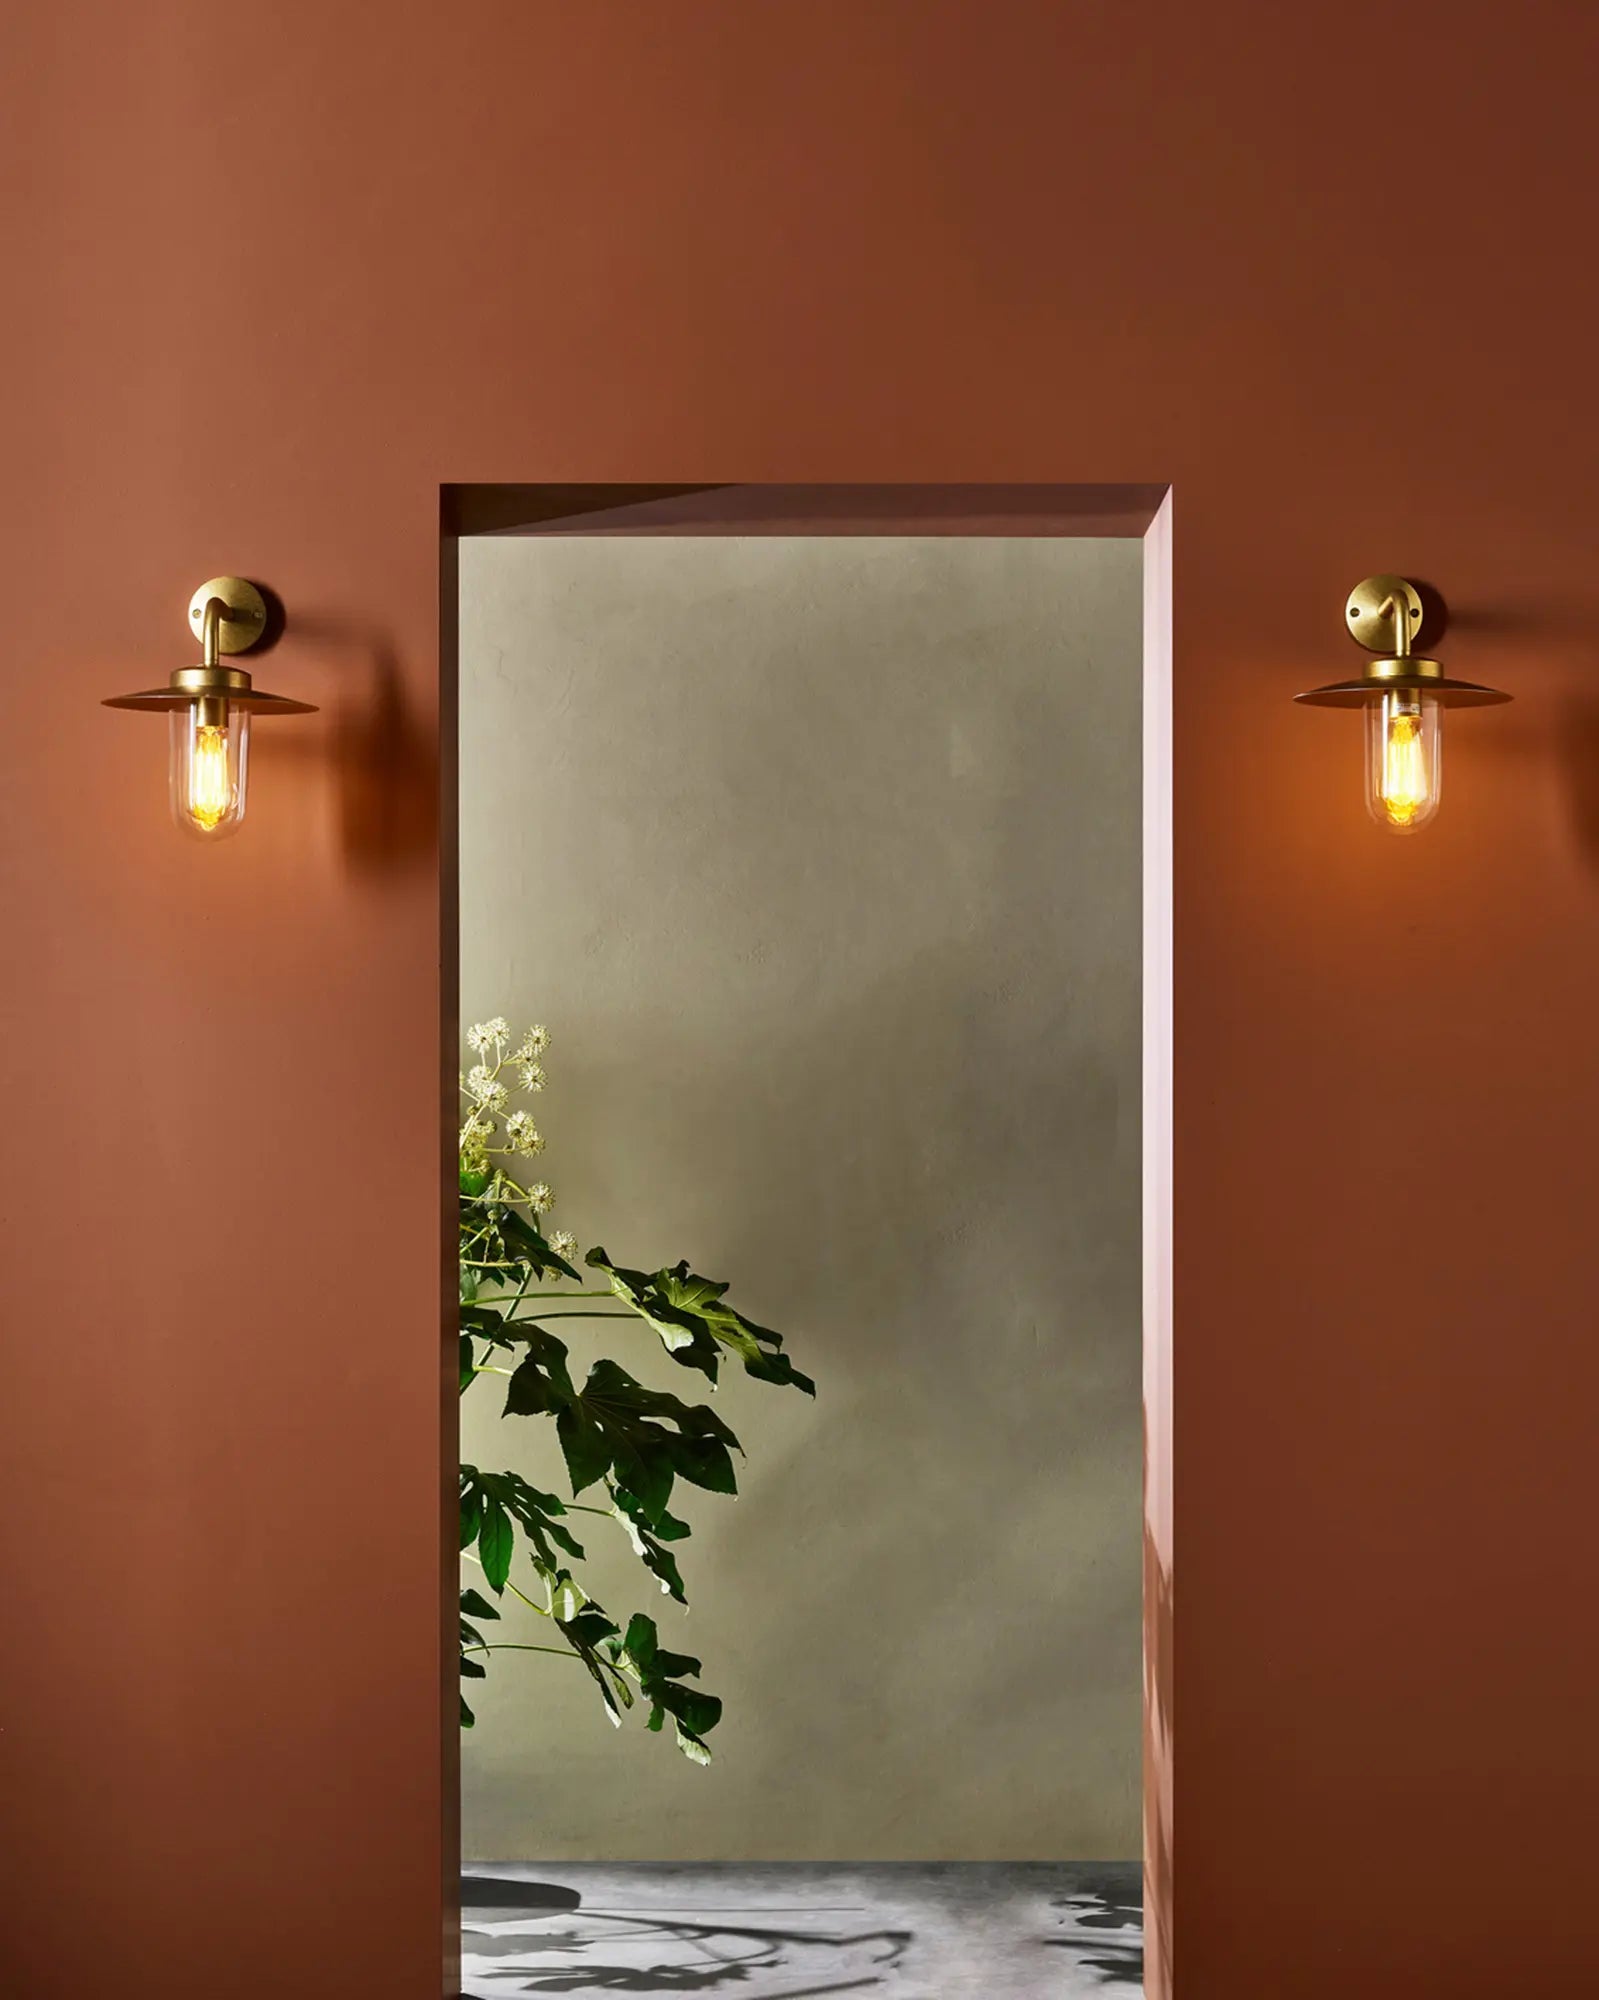 Portree Wall Light Outdoor lantern style coastal brass  wall light by the entrance